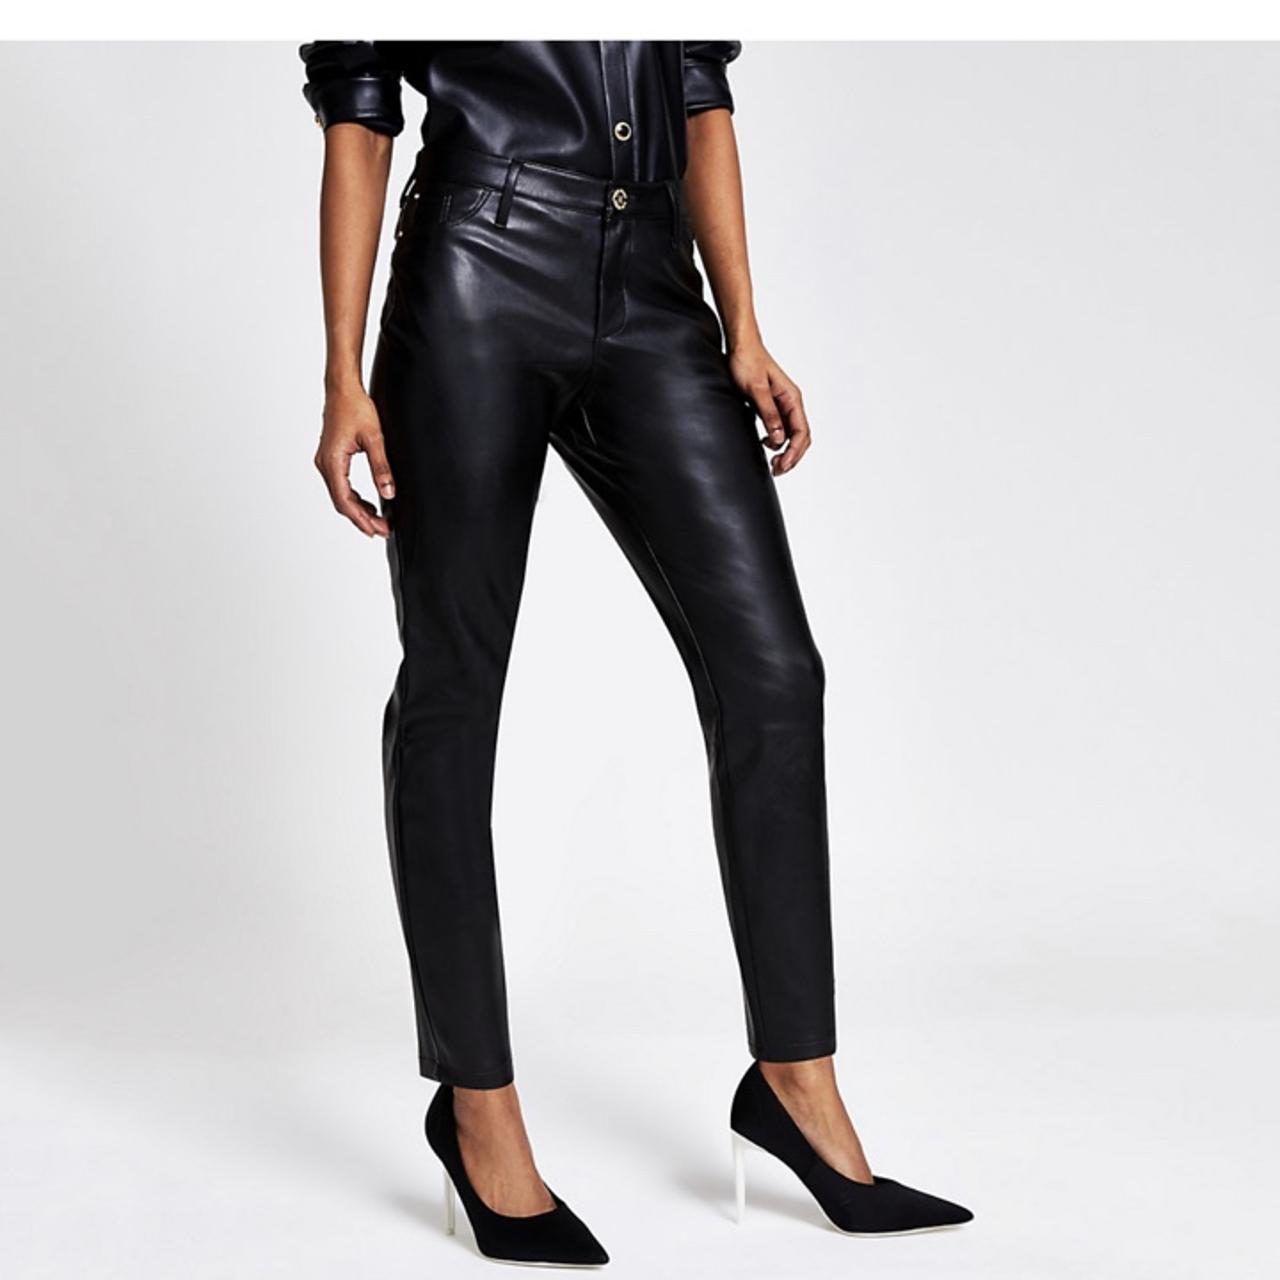 River Island suit in black faux leather  ASOS  River island suits Black  faux leather Trouser suits